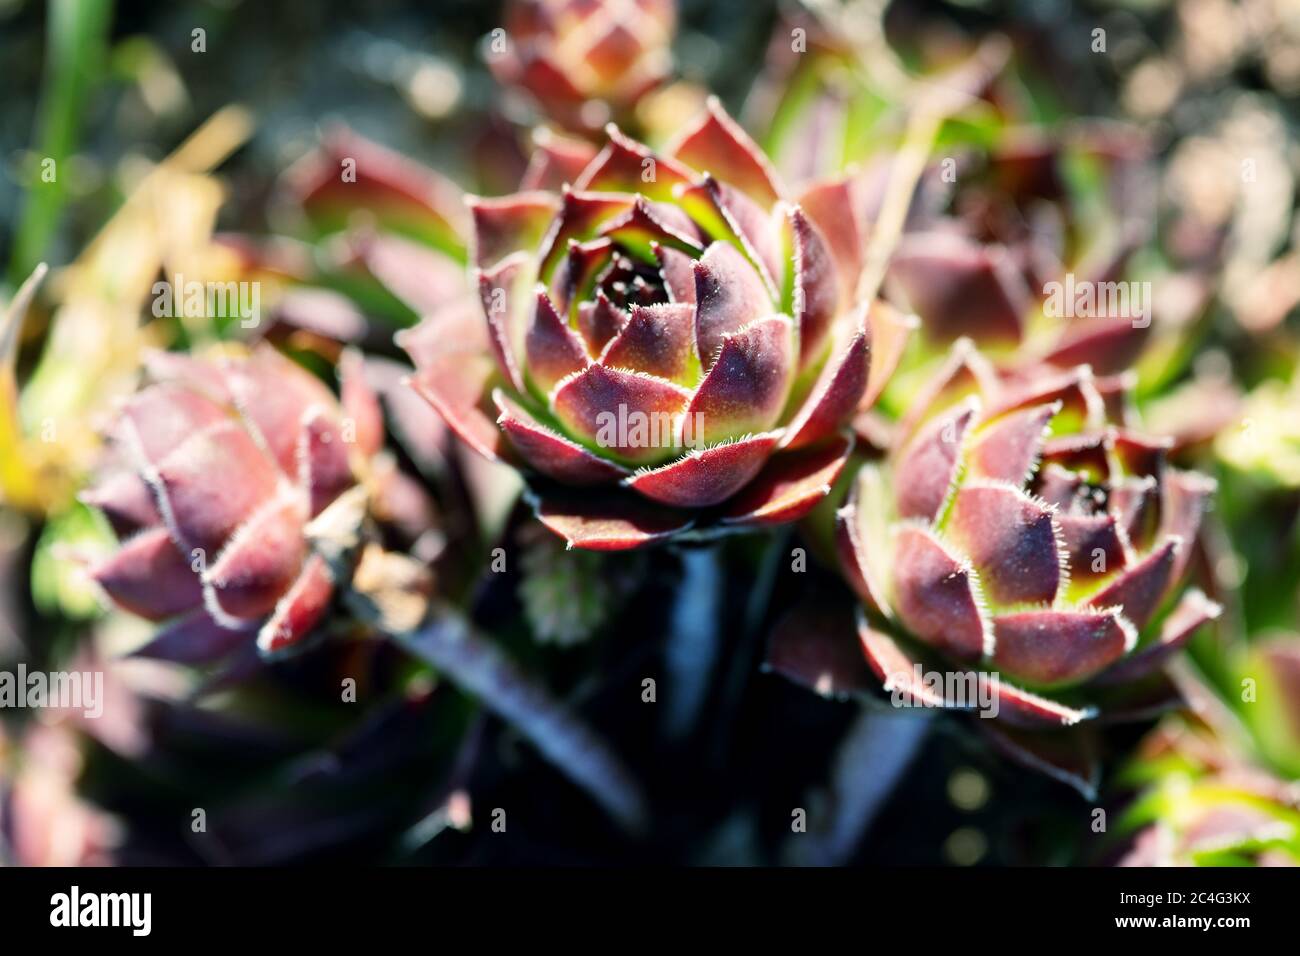 Three Sempervivum flowers growing in the garden bed lit by sun rays Stock Photo